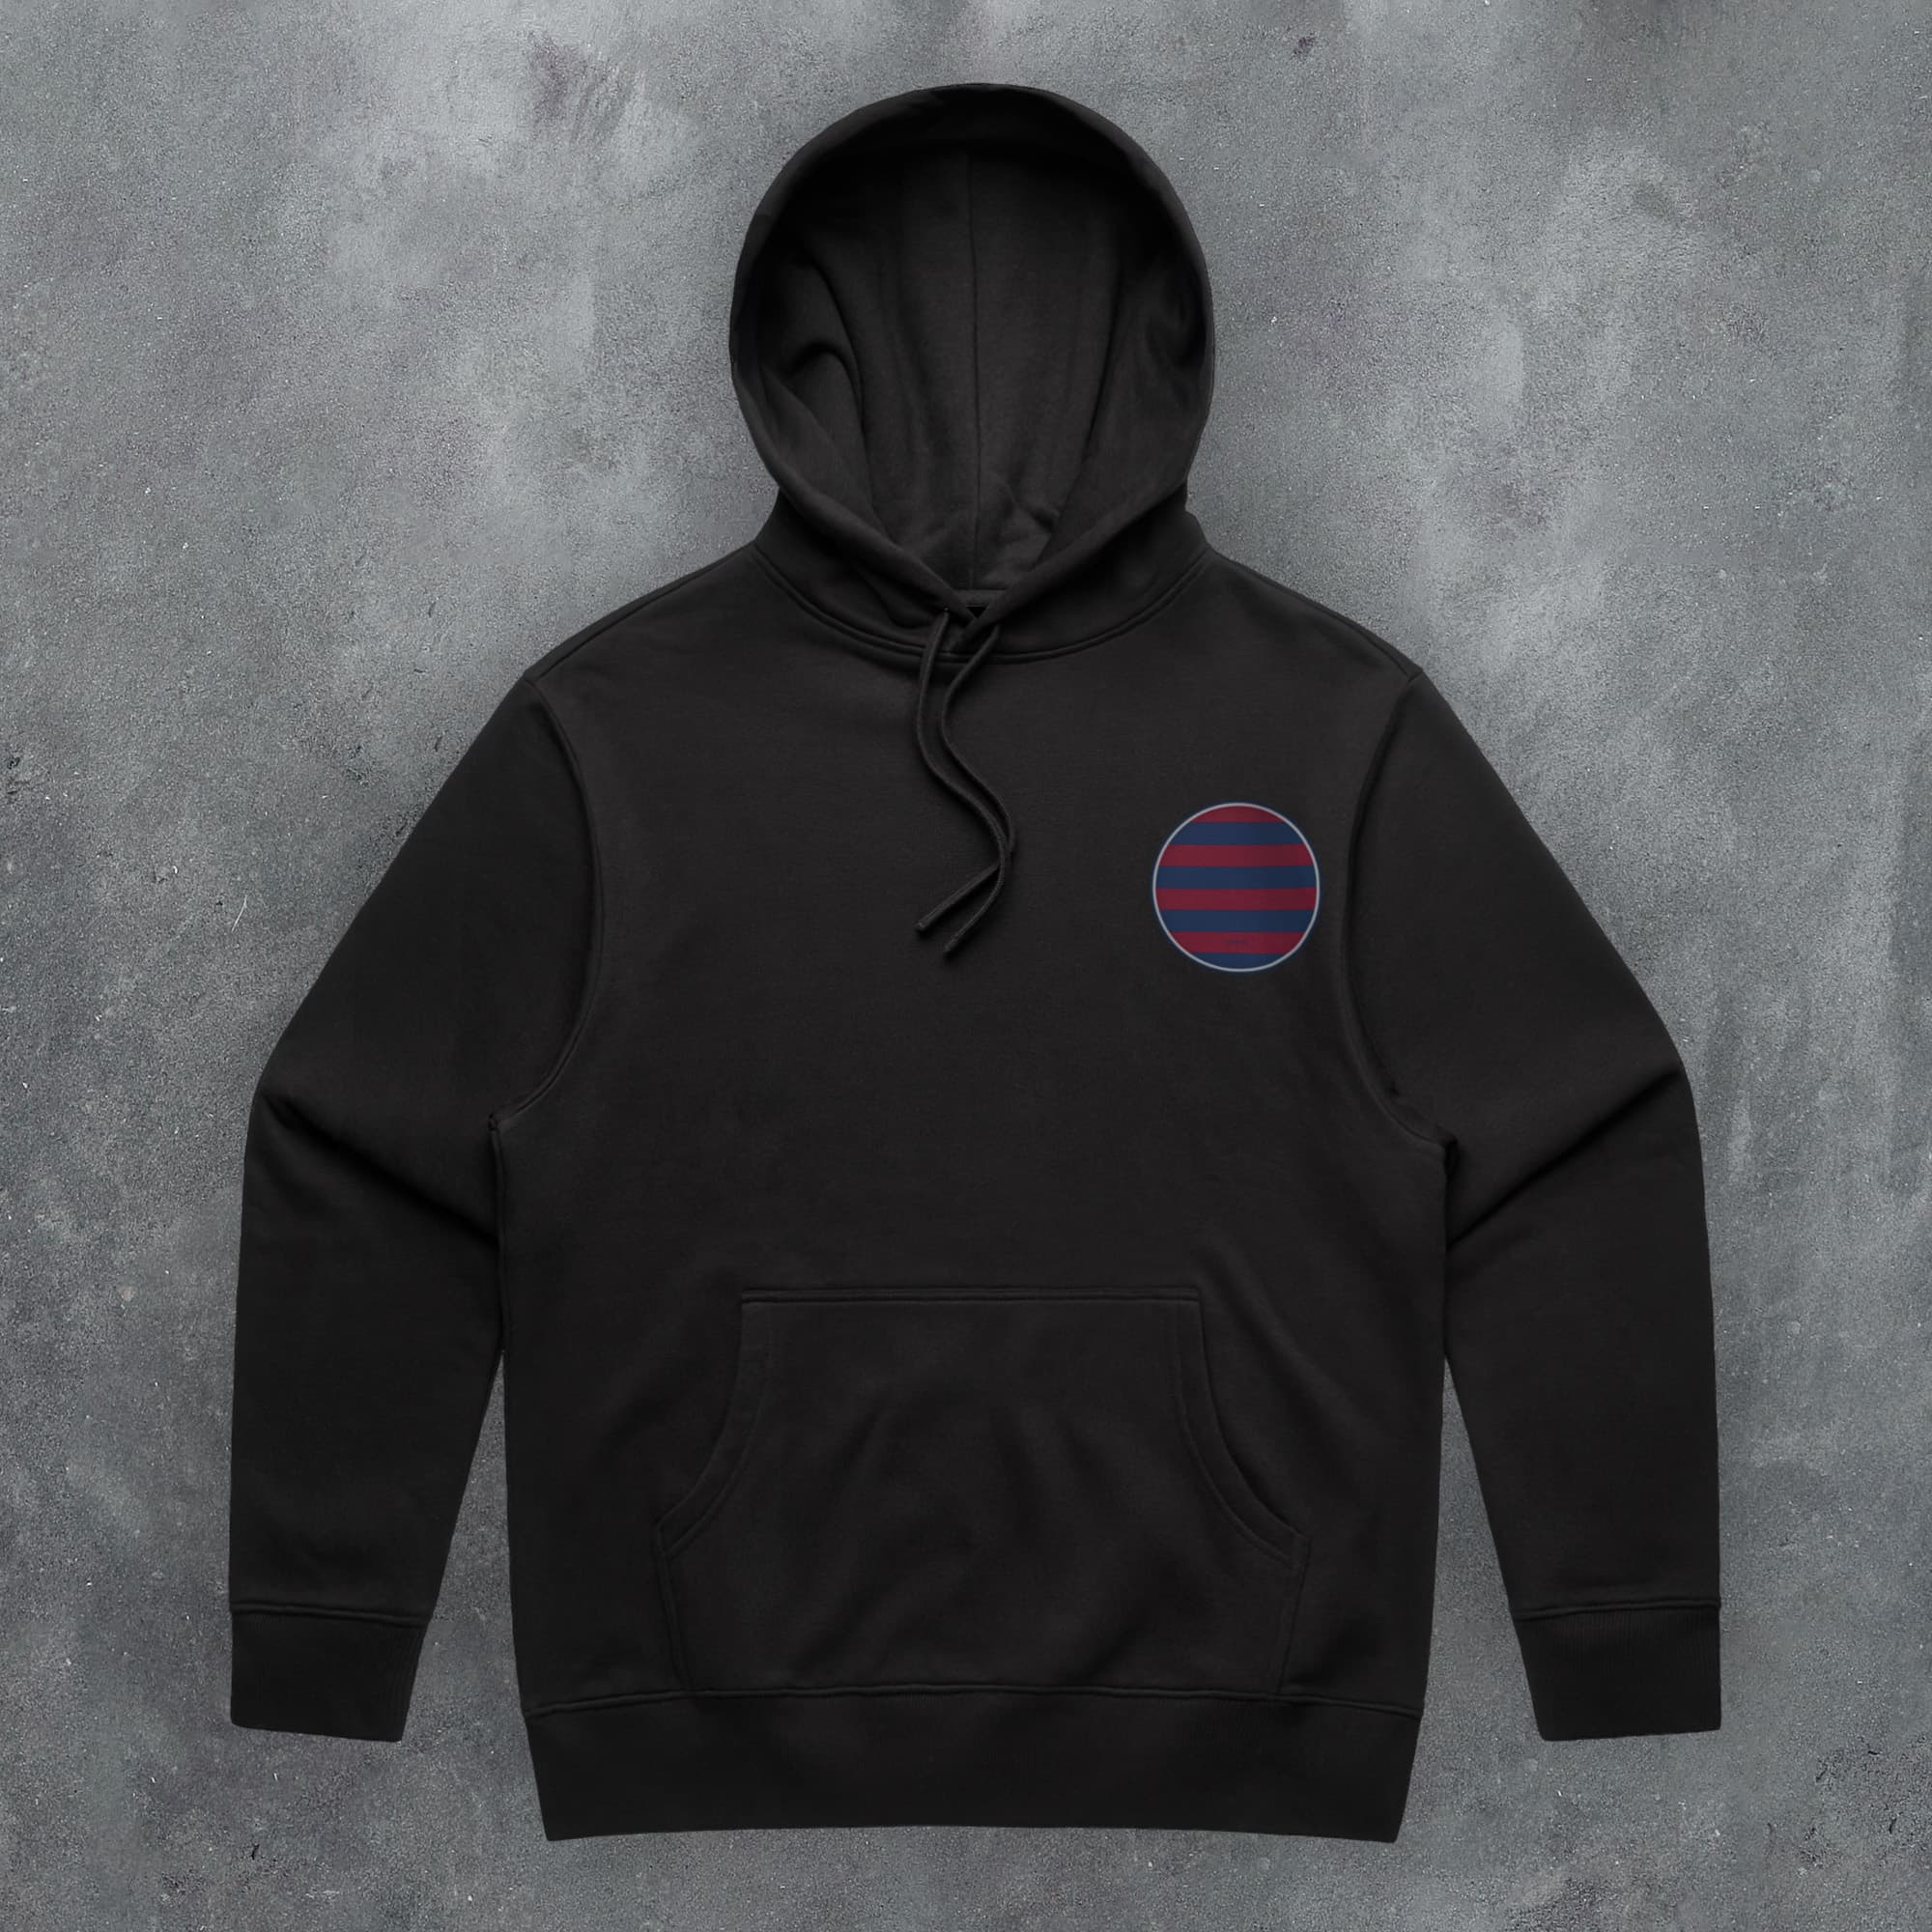 a black hoodie with a red and blue circle on it